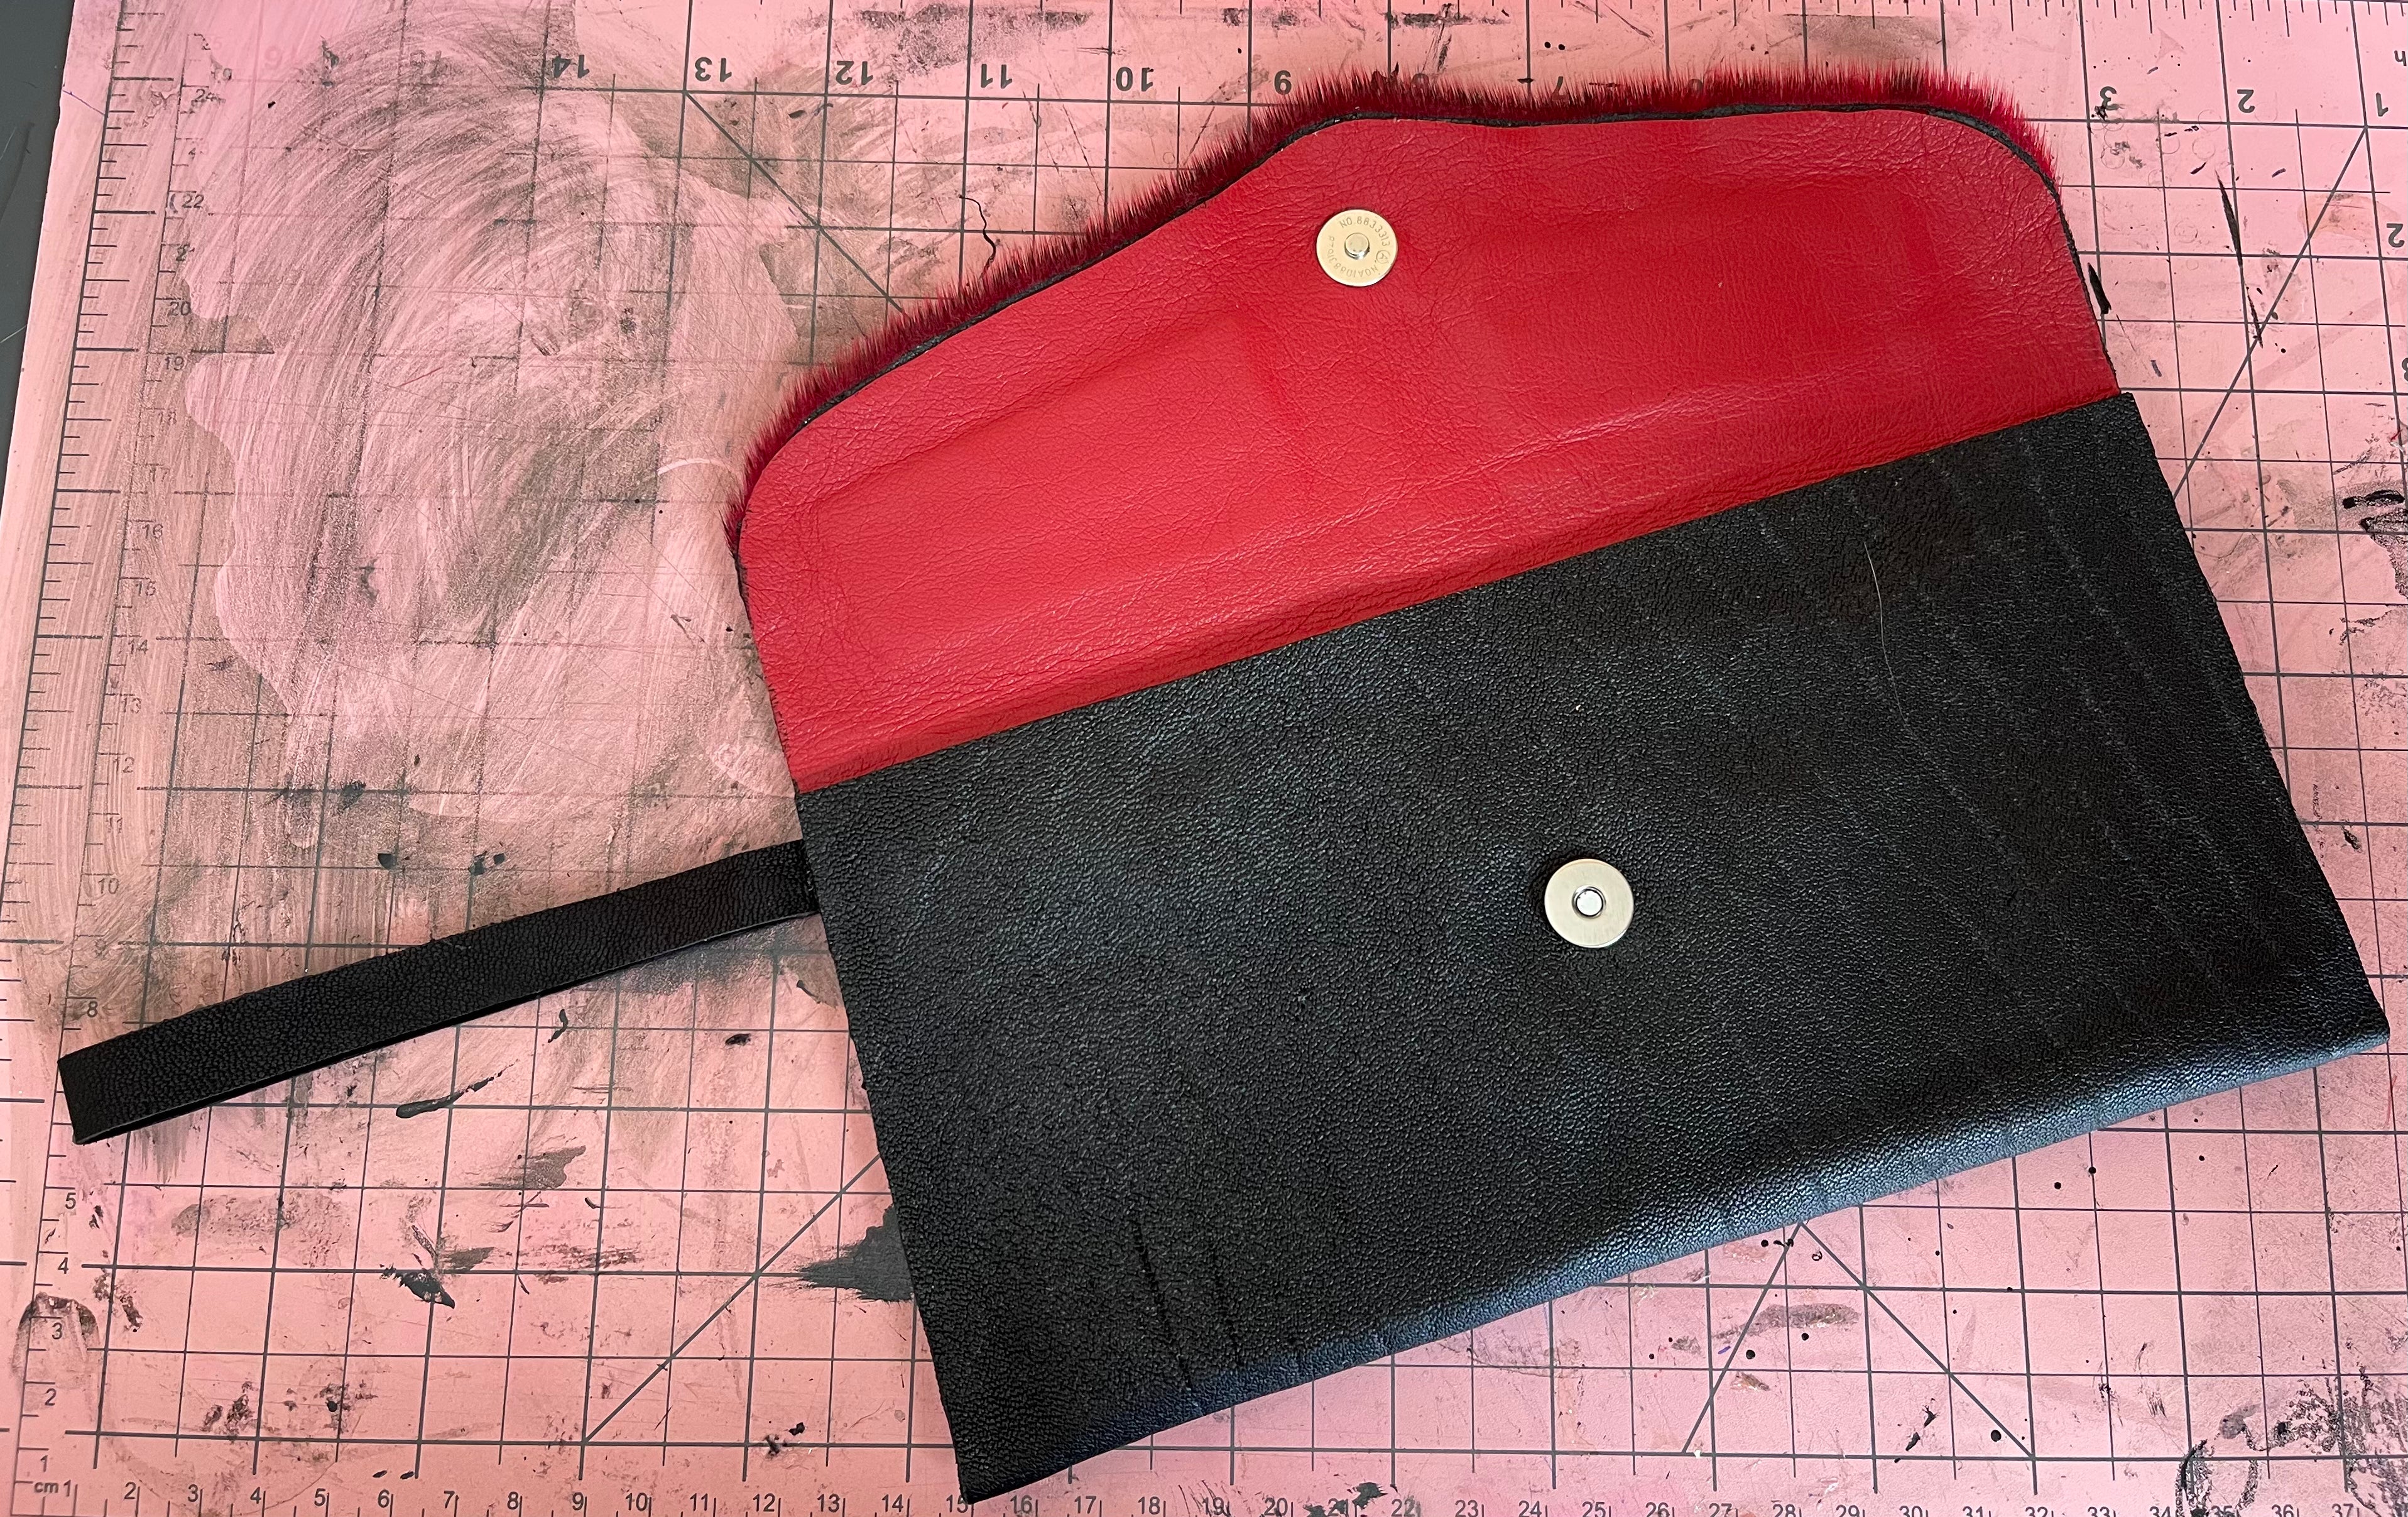 Clutch - Dyed Red Harp Seal Fur w/strap